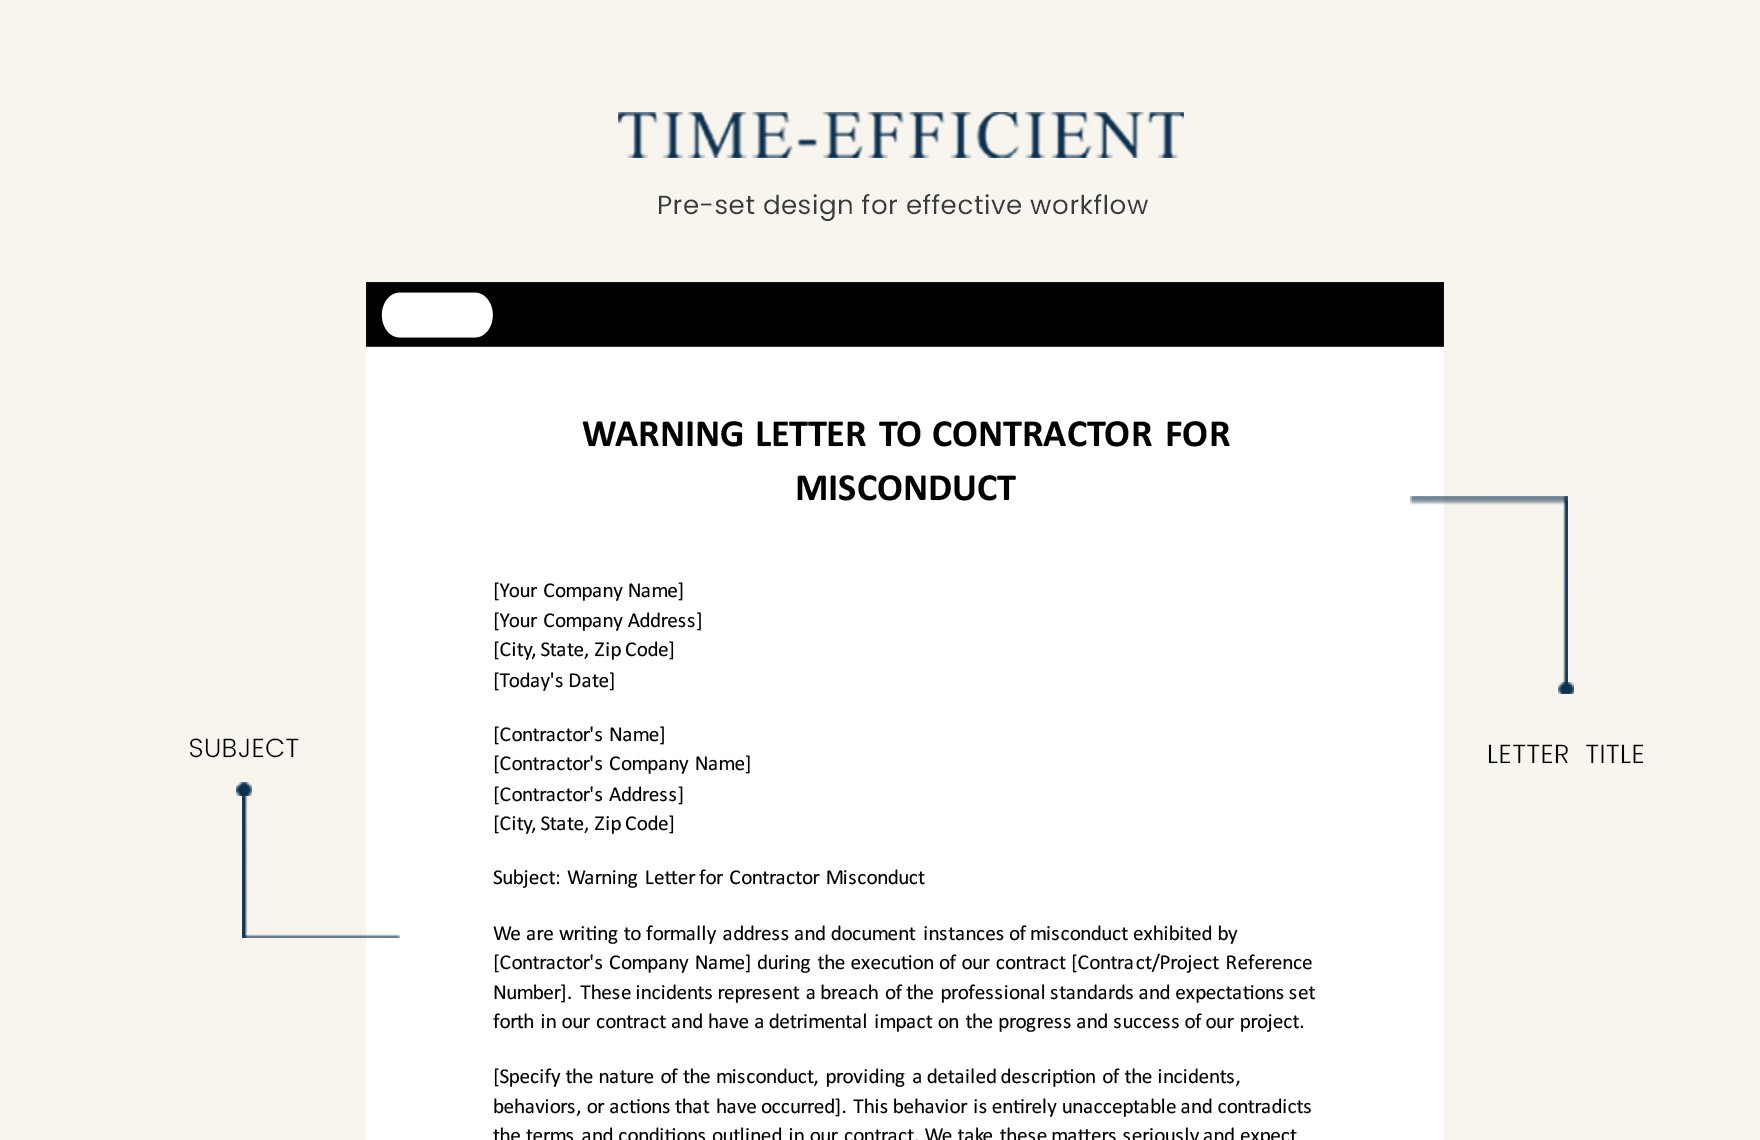  Warning Letter To Contractor For Misconduct